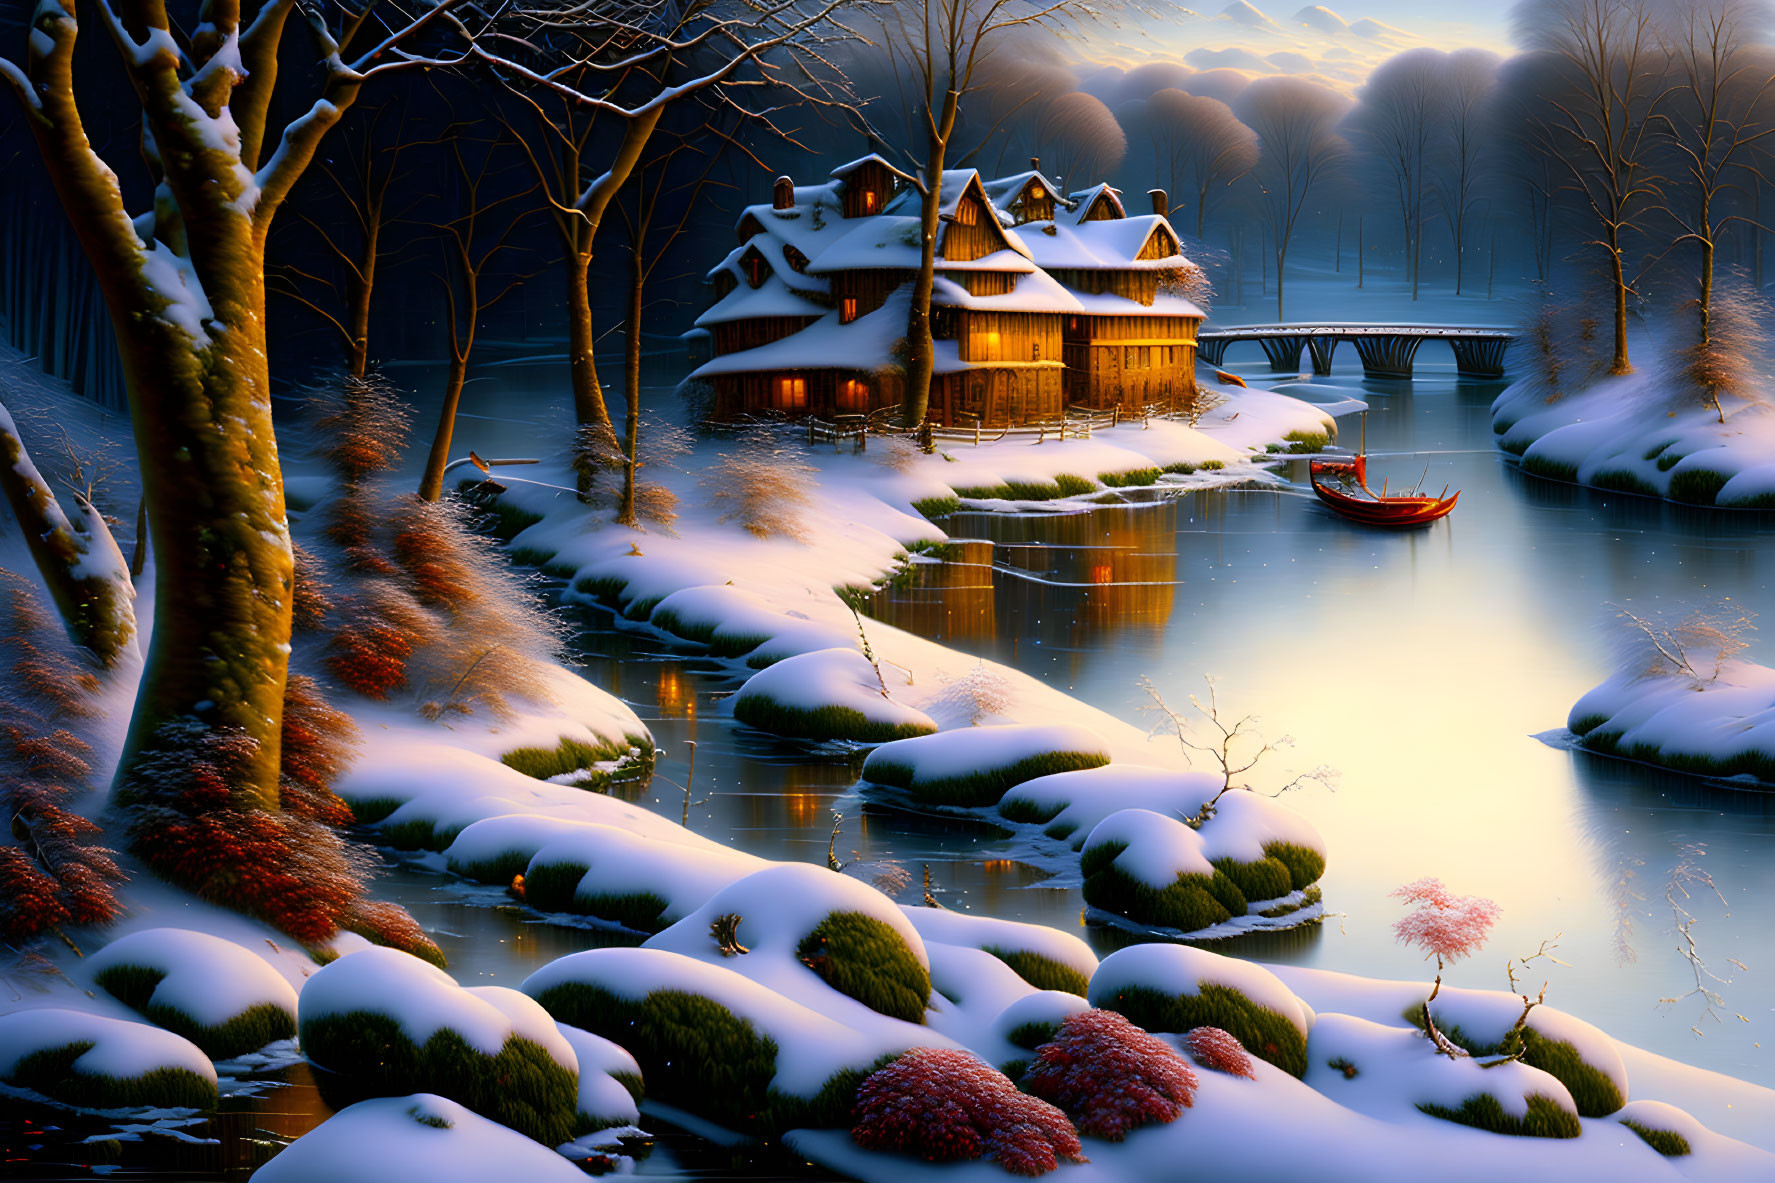 Snow-covered riverbank with wooden house and canoe at dusk